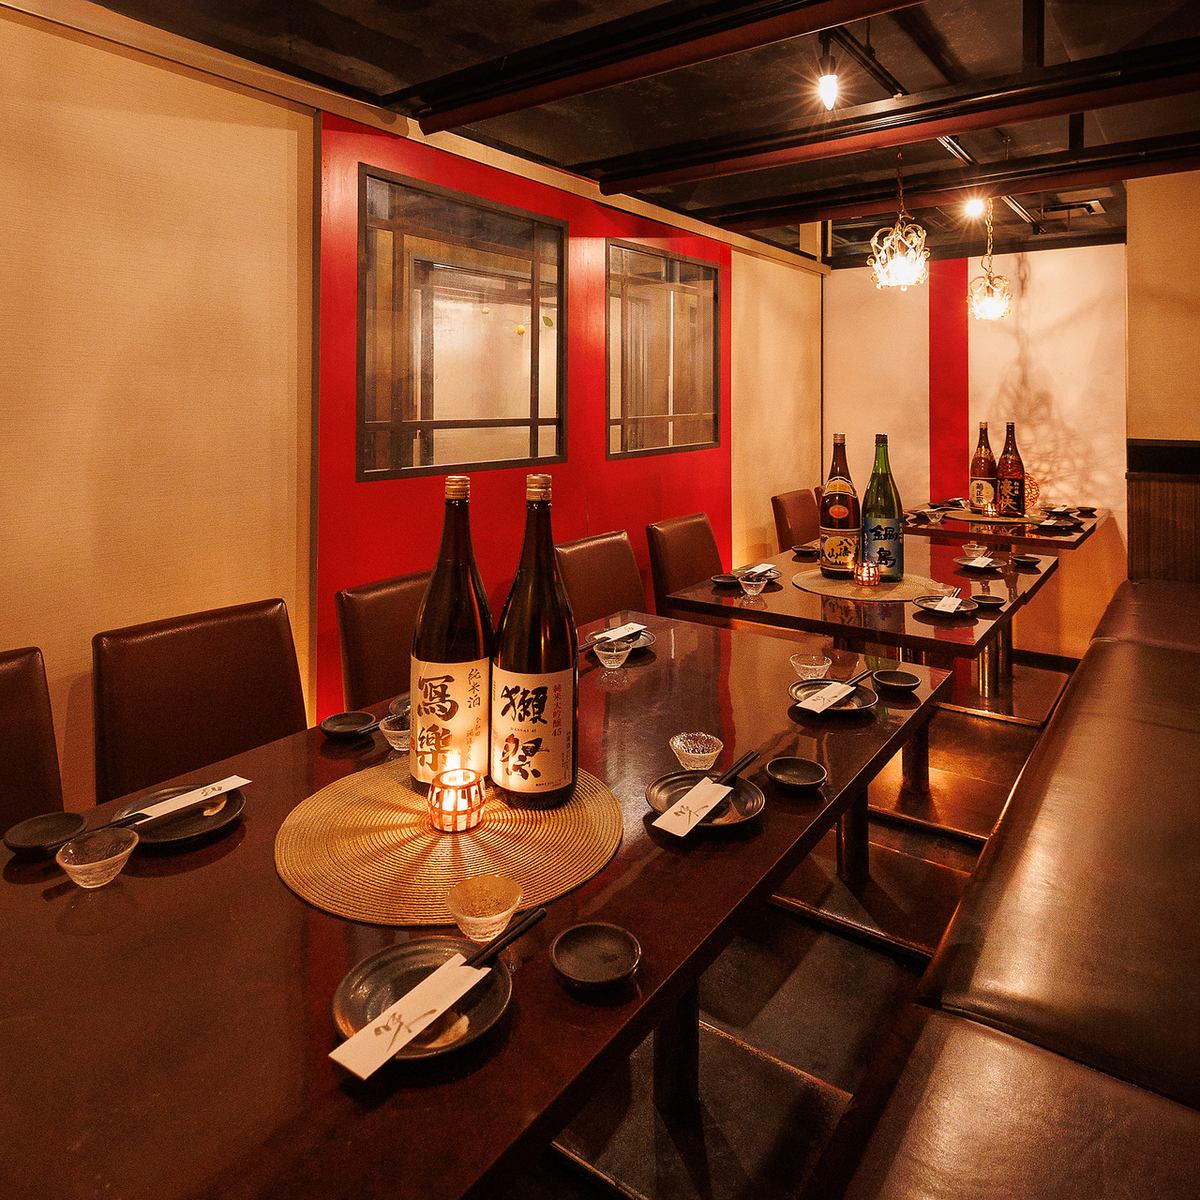 We have a private room space for 2 people ◎ A modern Japanese bar with a variety of meats and sours ♪